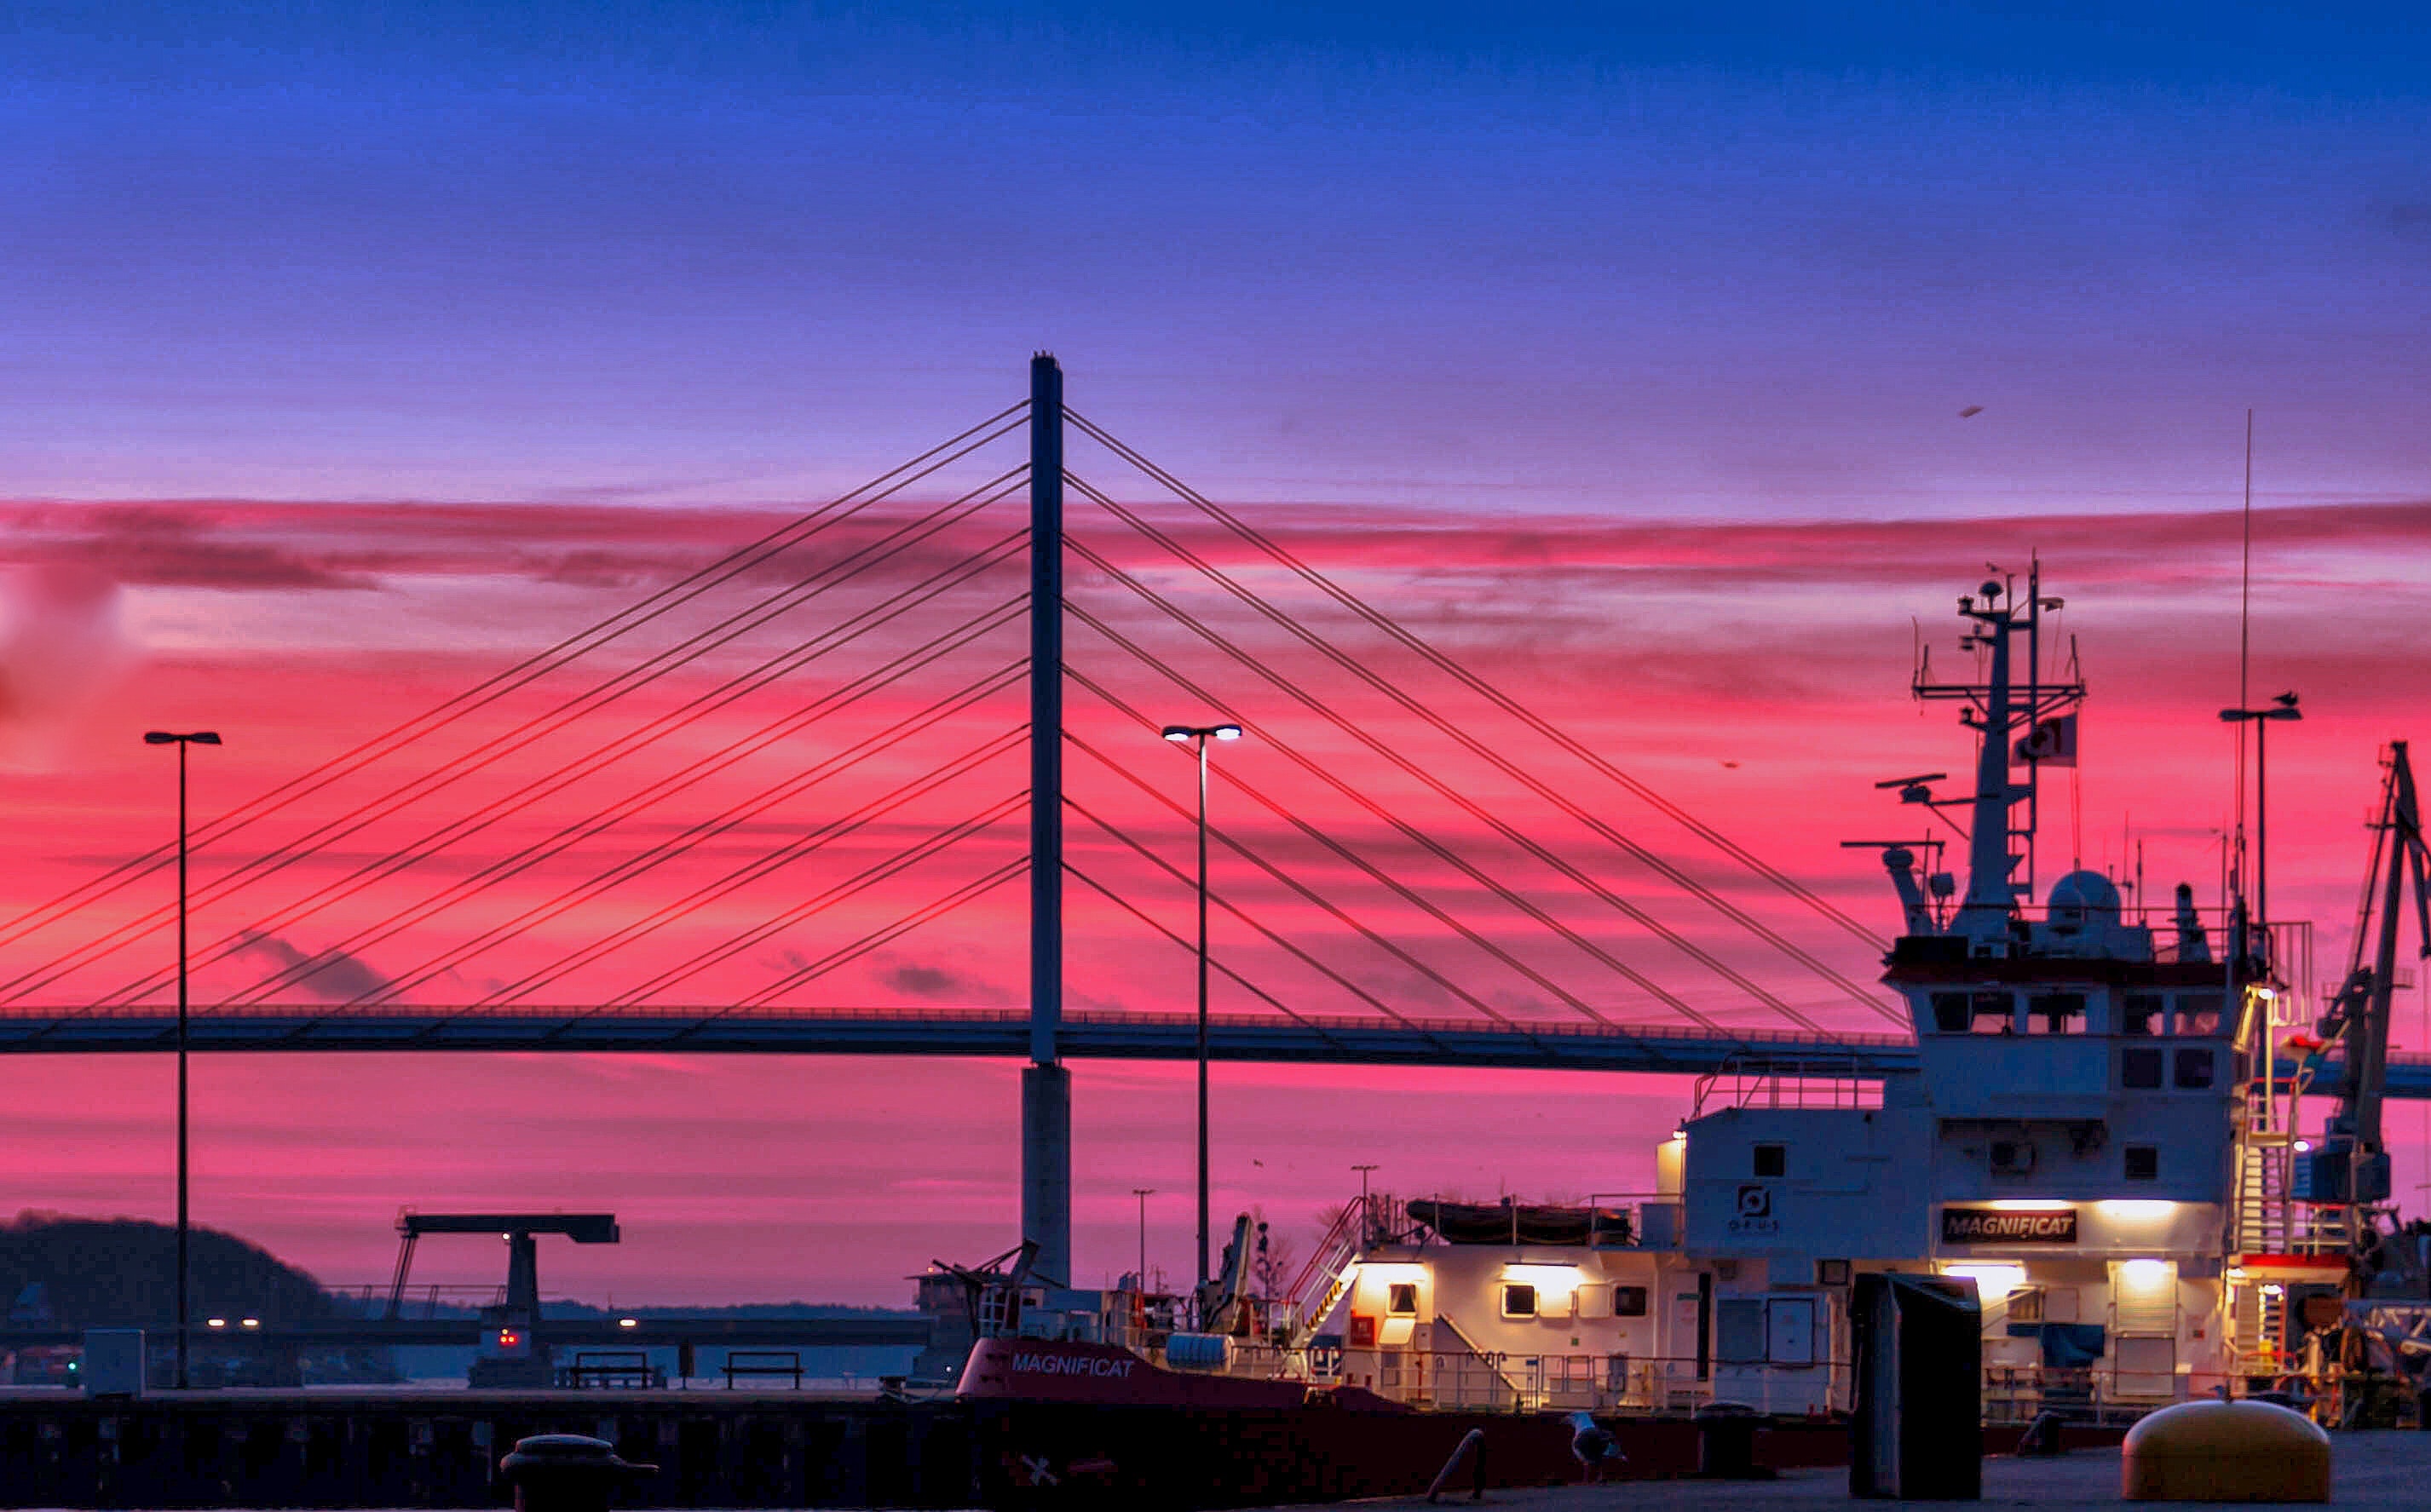 Silhouette of a bridge under red clouds and blue sky taken during night time photo